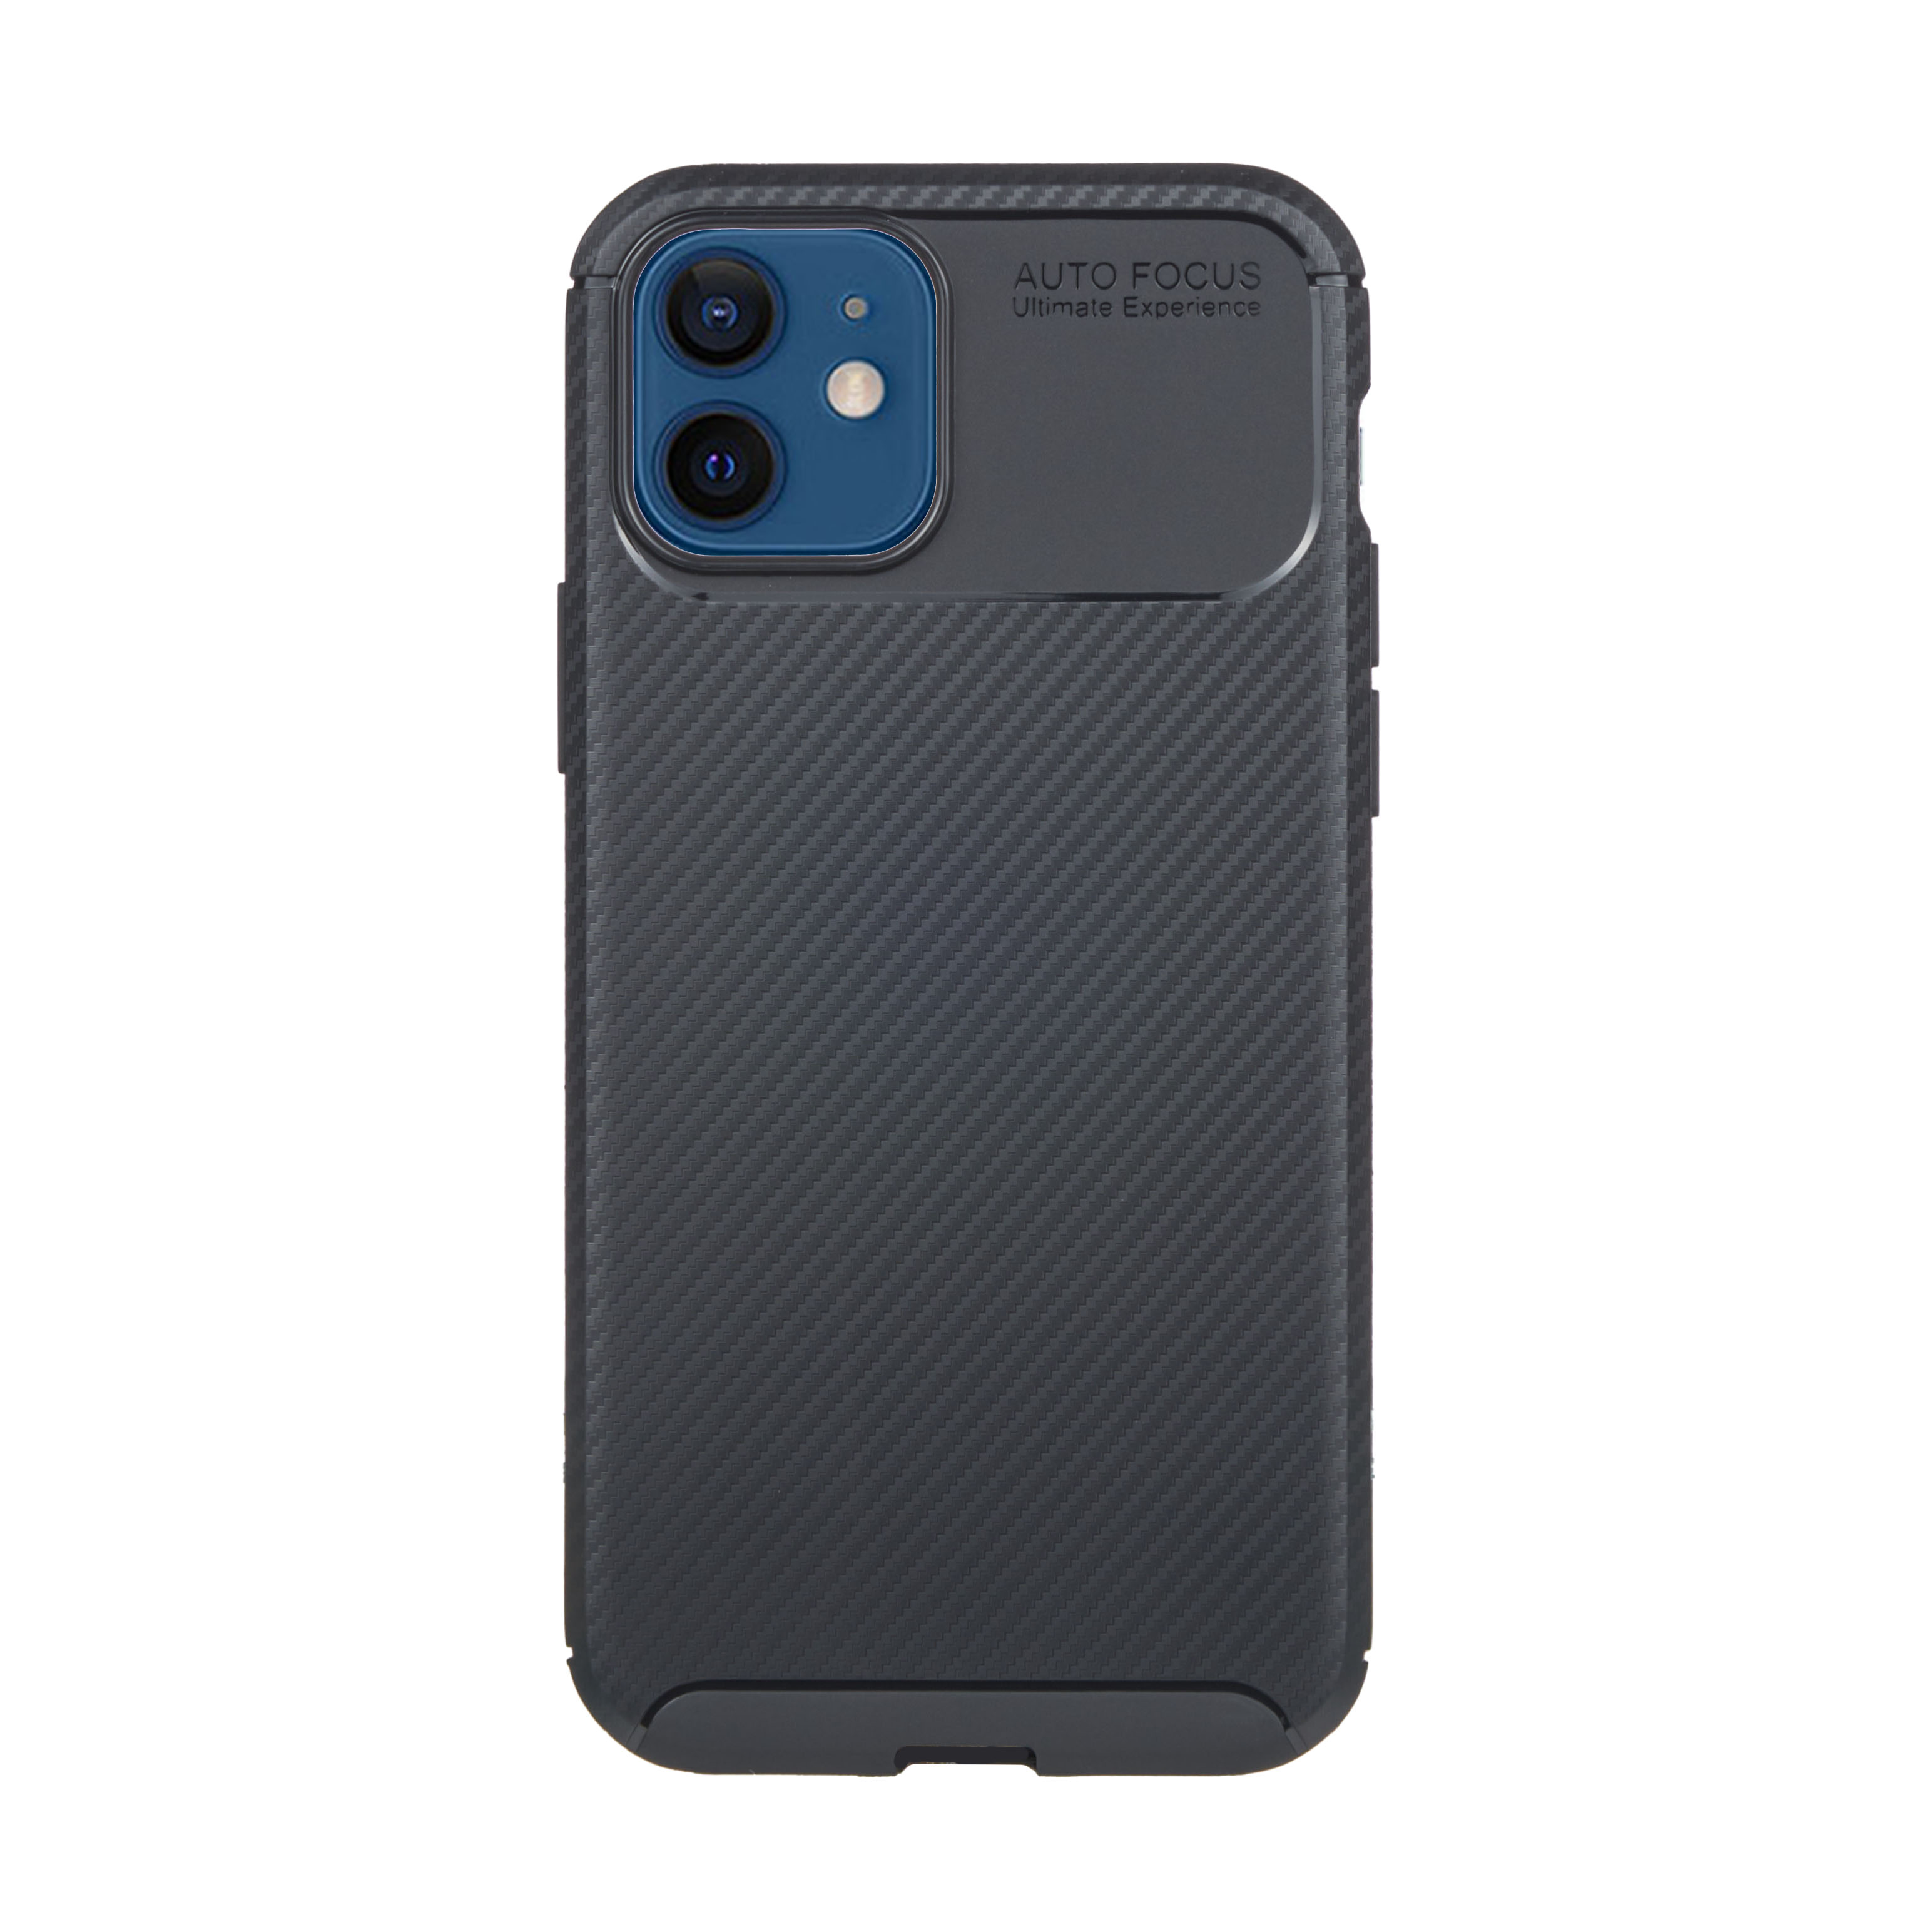 Tpu carbon new for iphone 12/12 pro (6.1") black